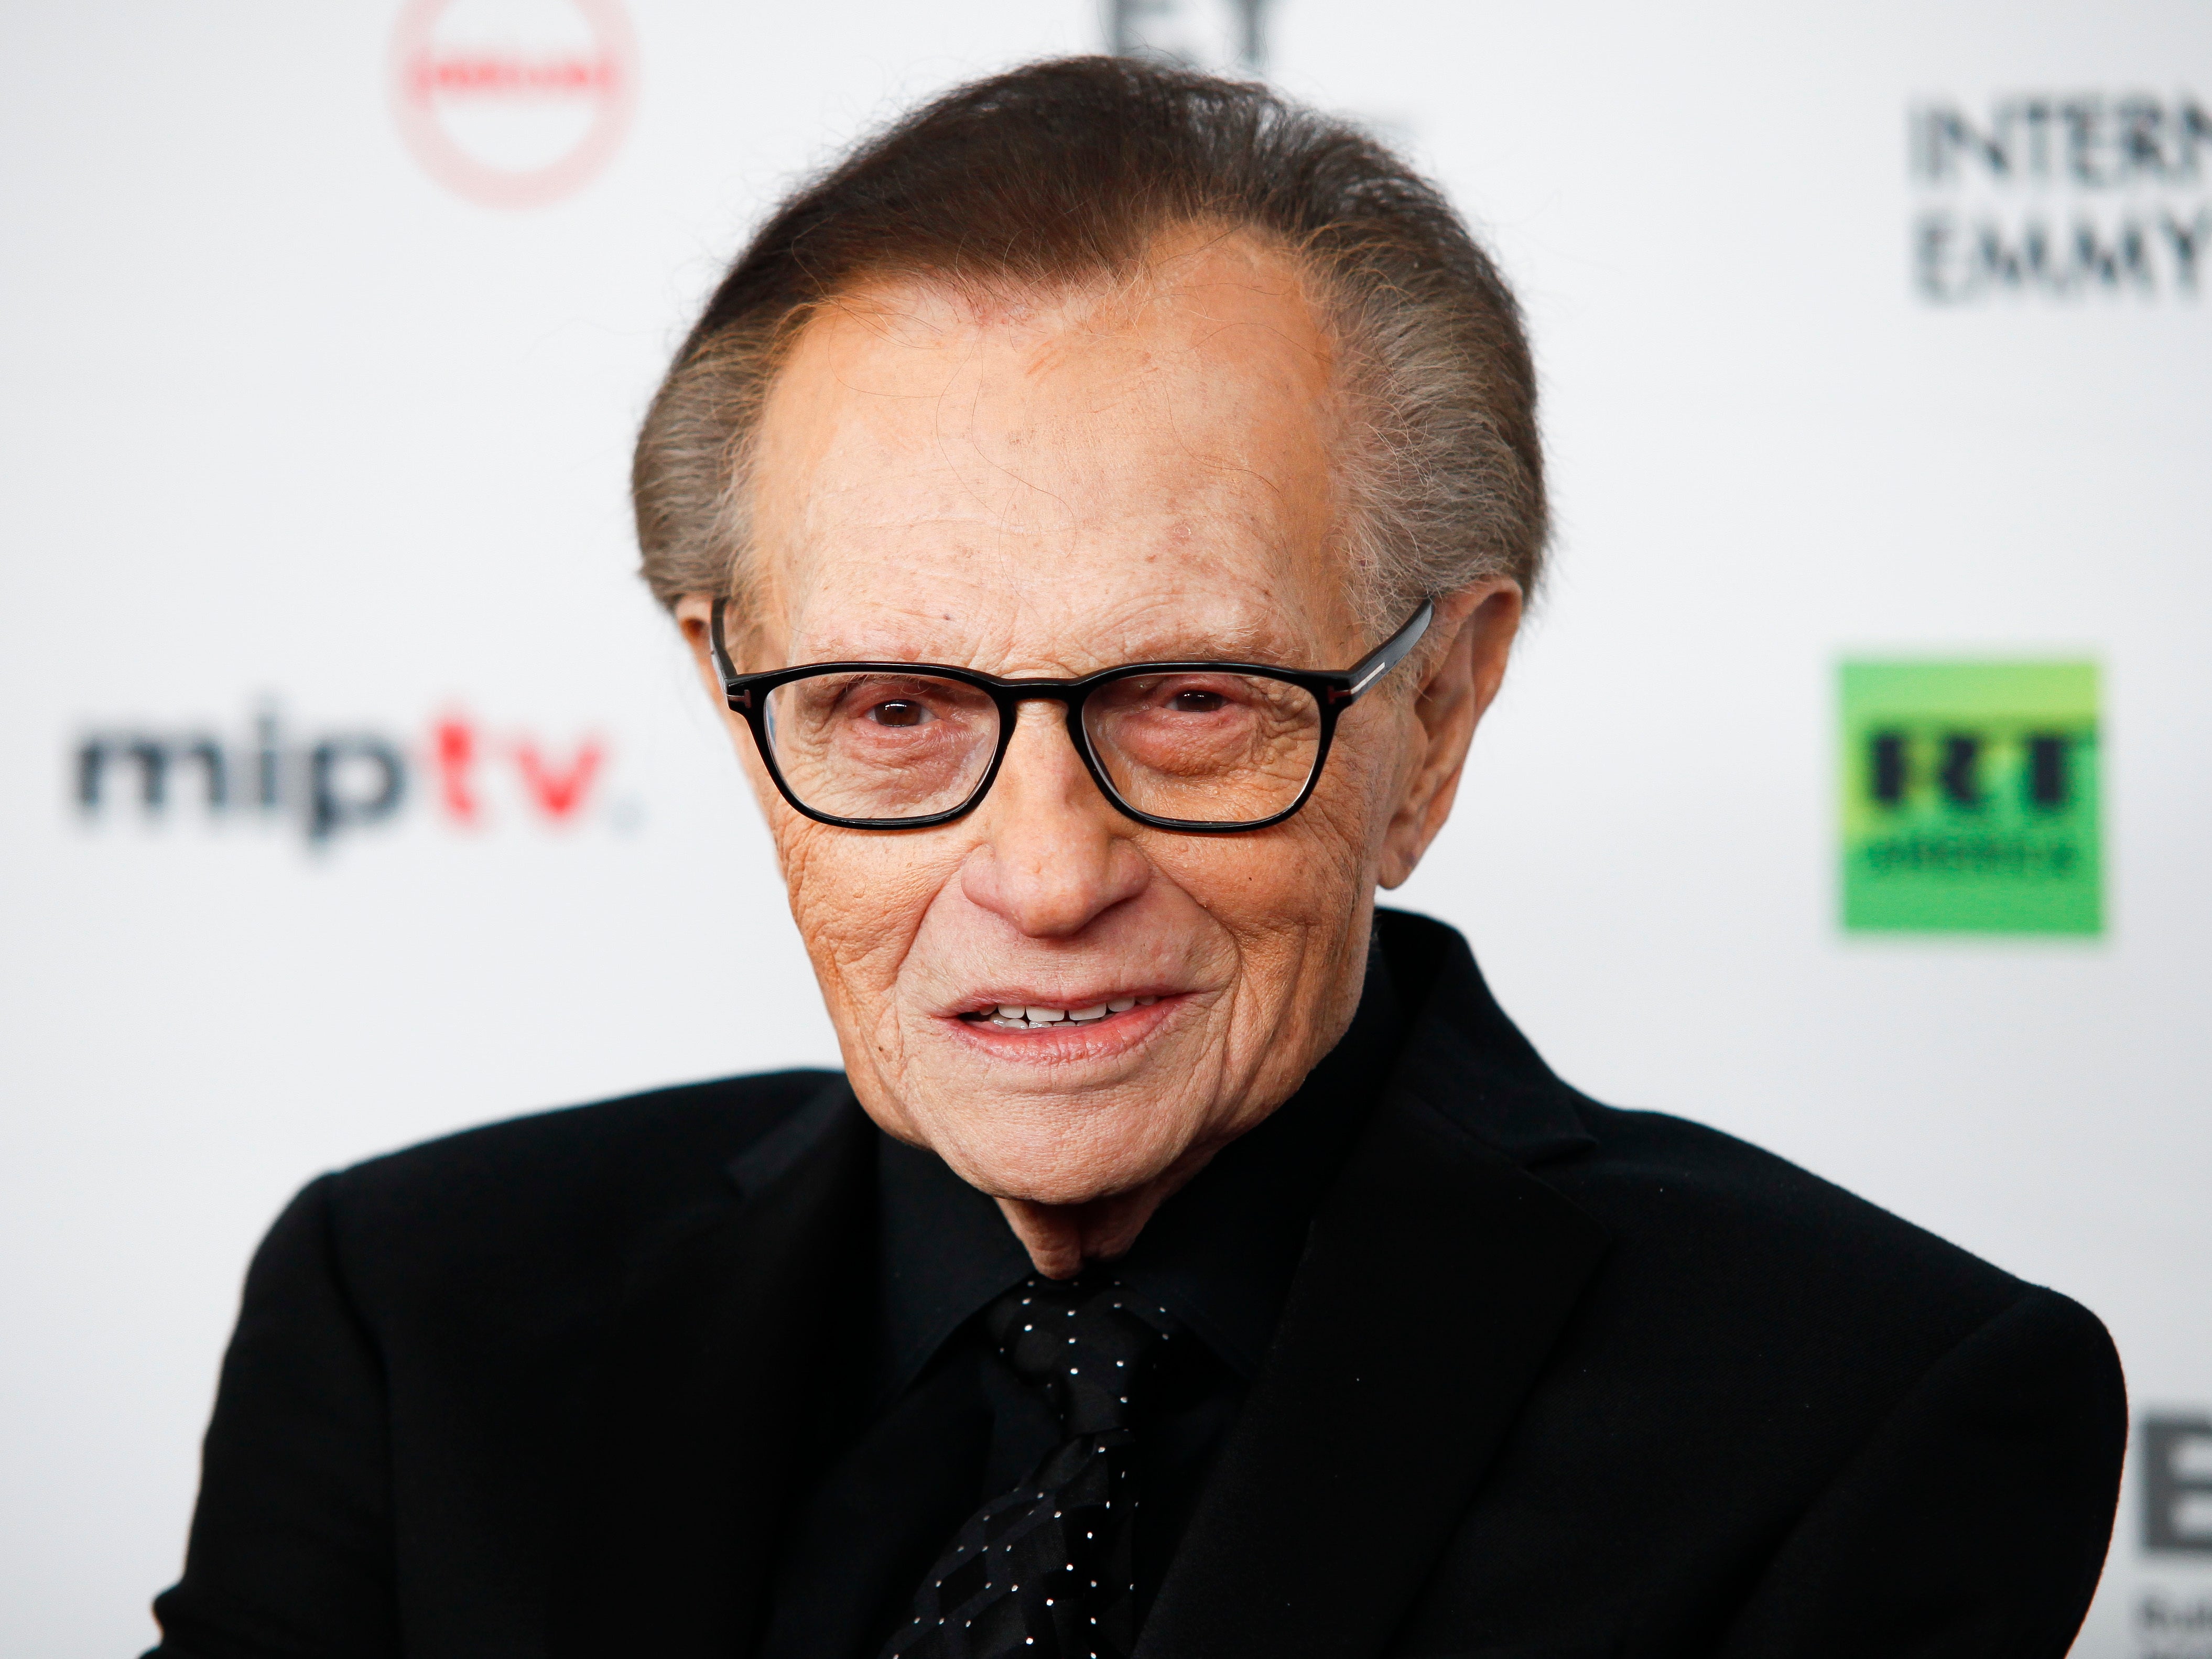 Larry King moved out of ICU while hospitalized with Covid-19